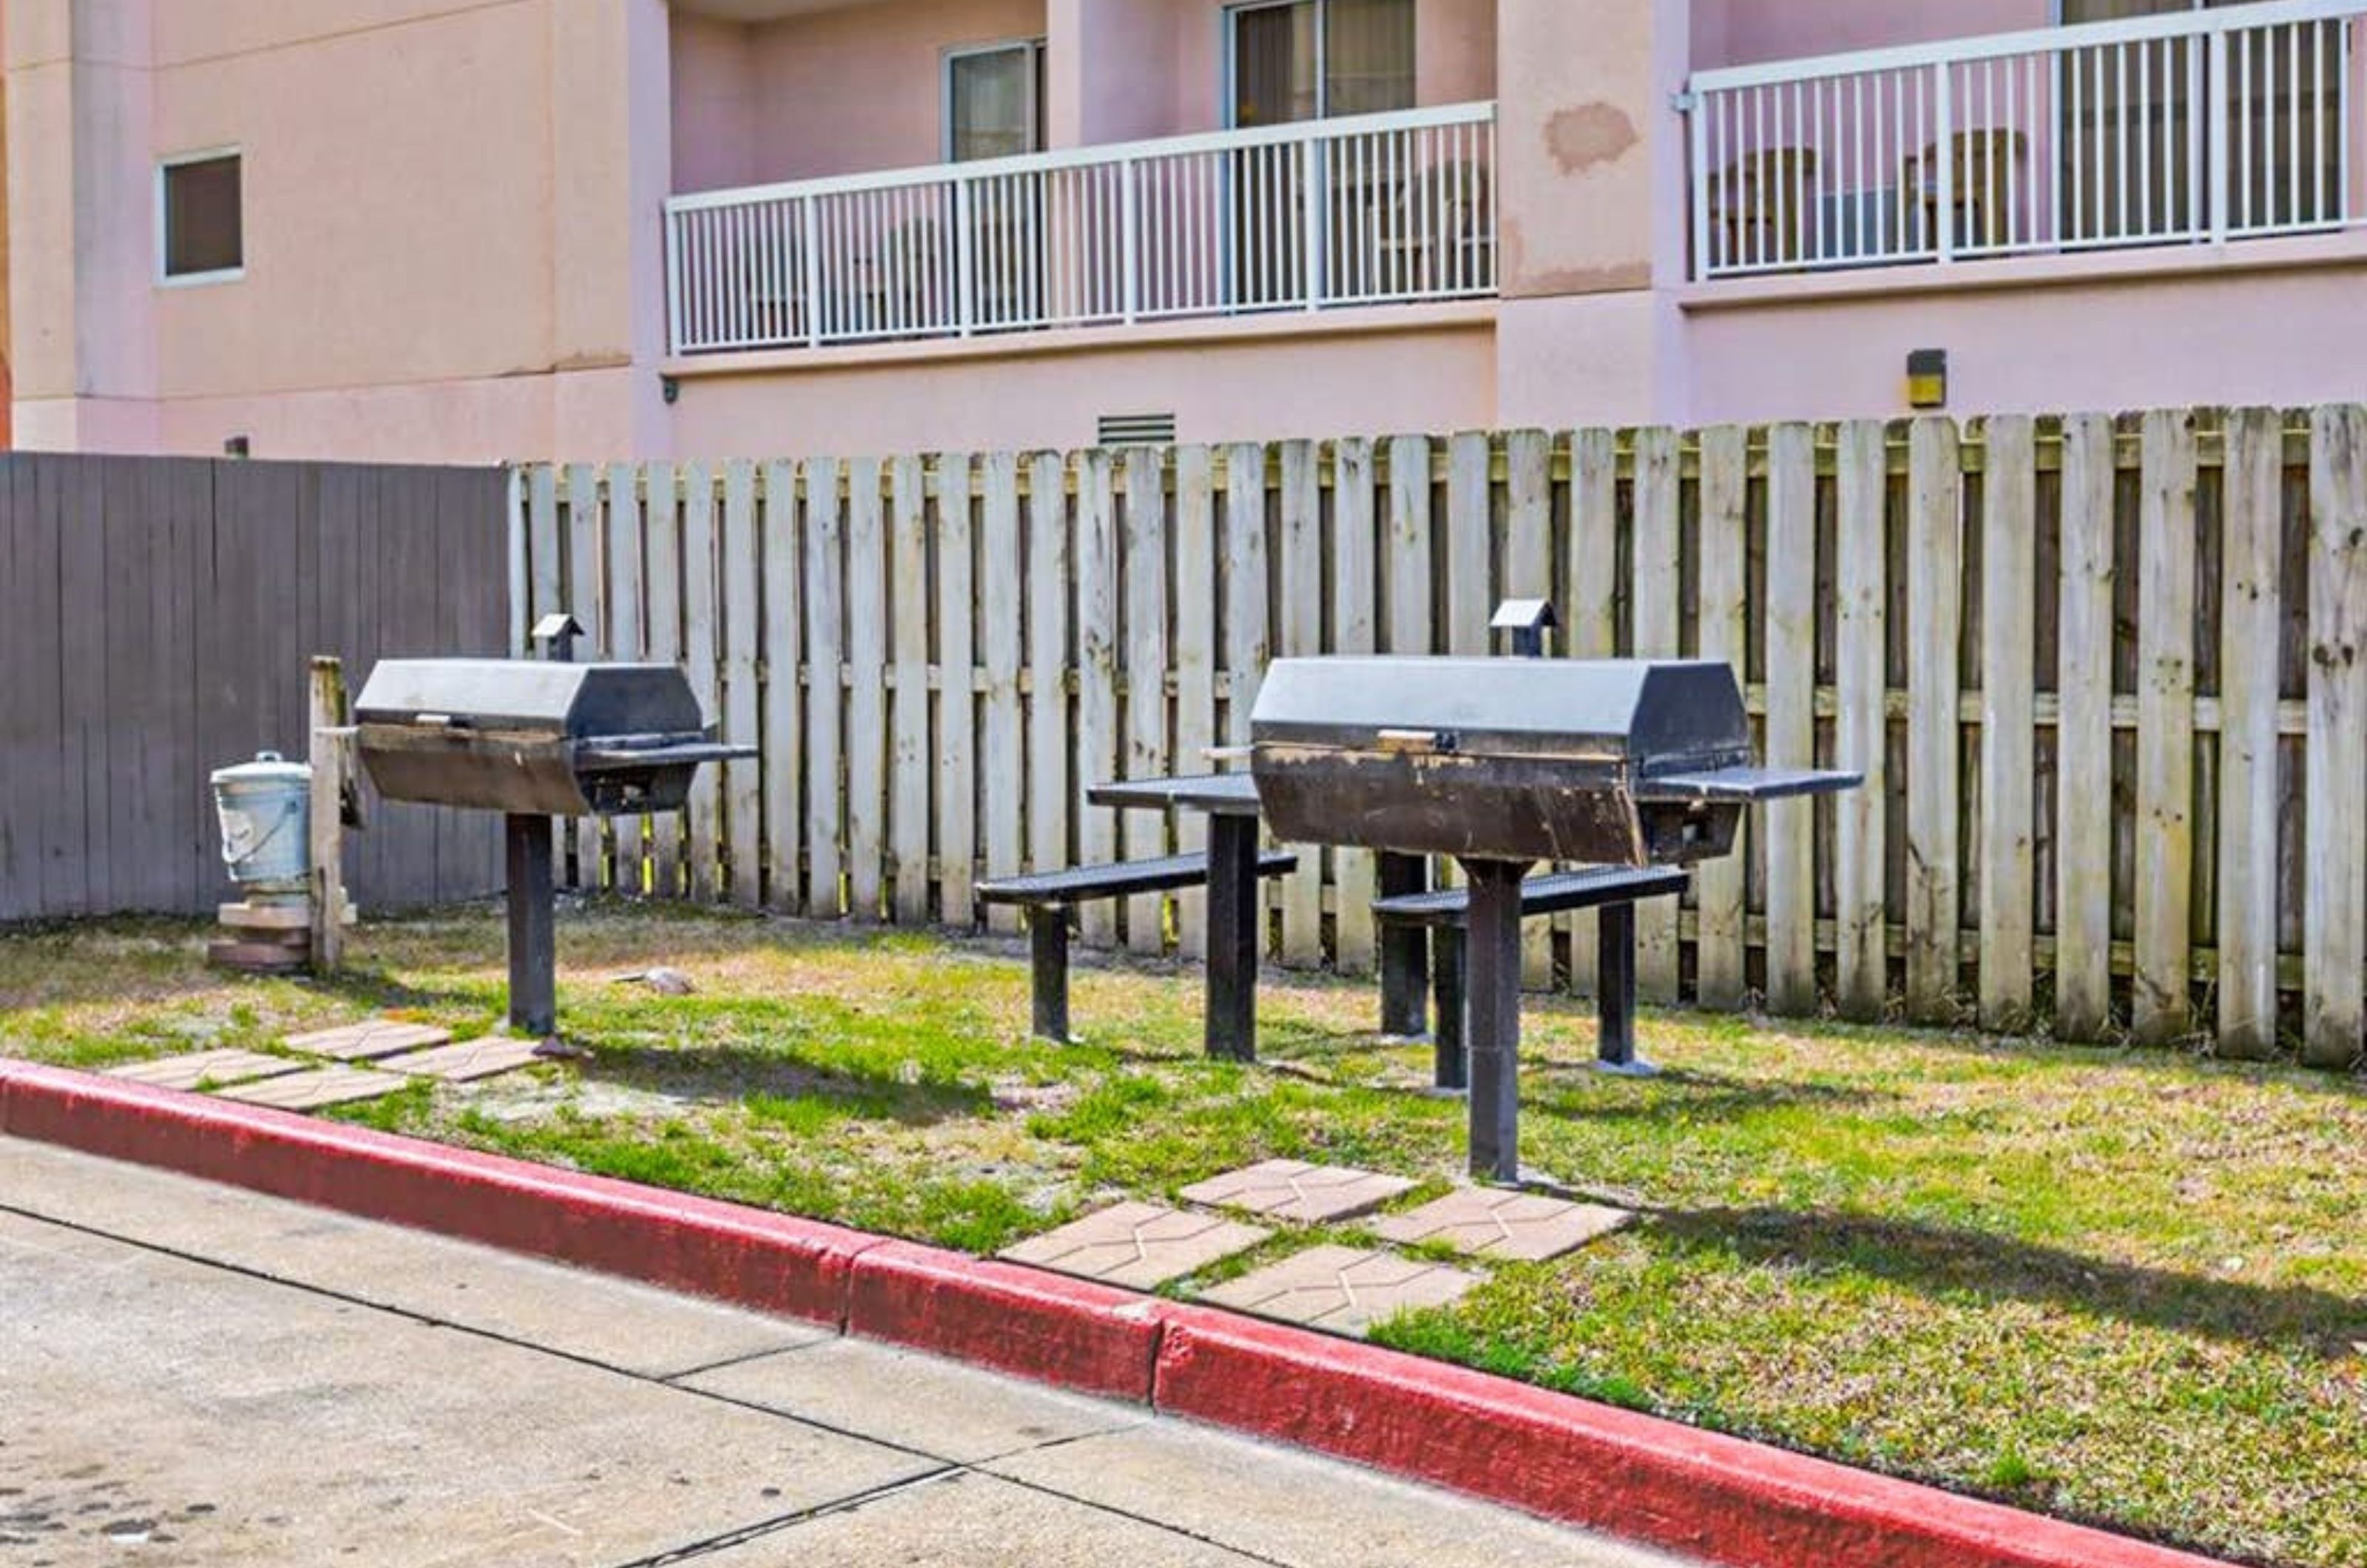 The outdoor barbecue grills at Shoalwater Condominiums in Orange Beach Alabama 